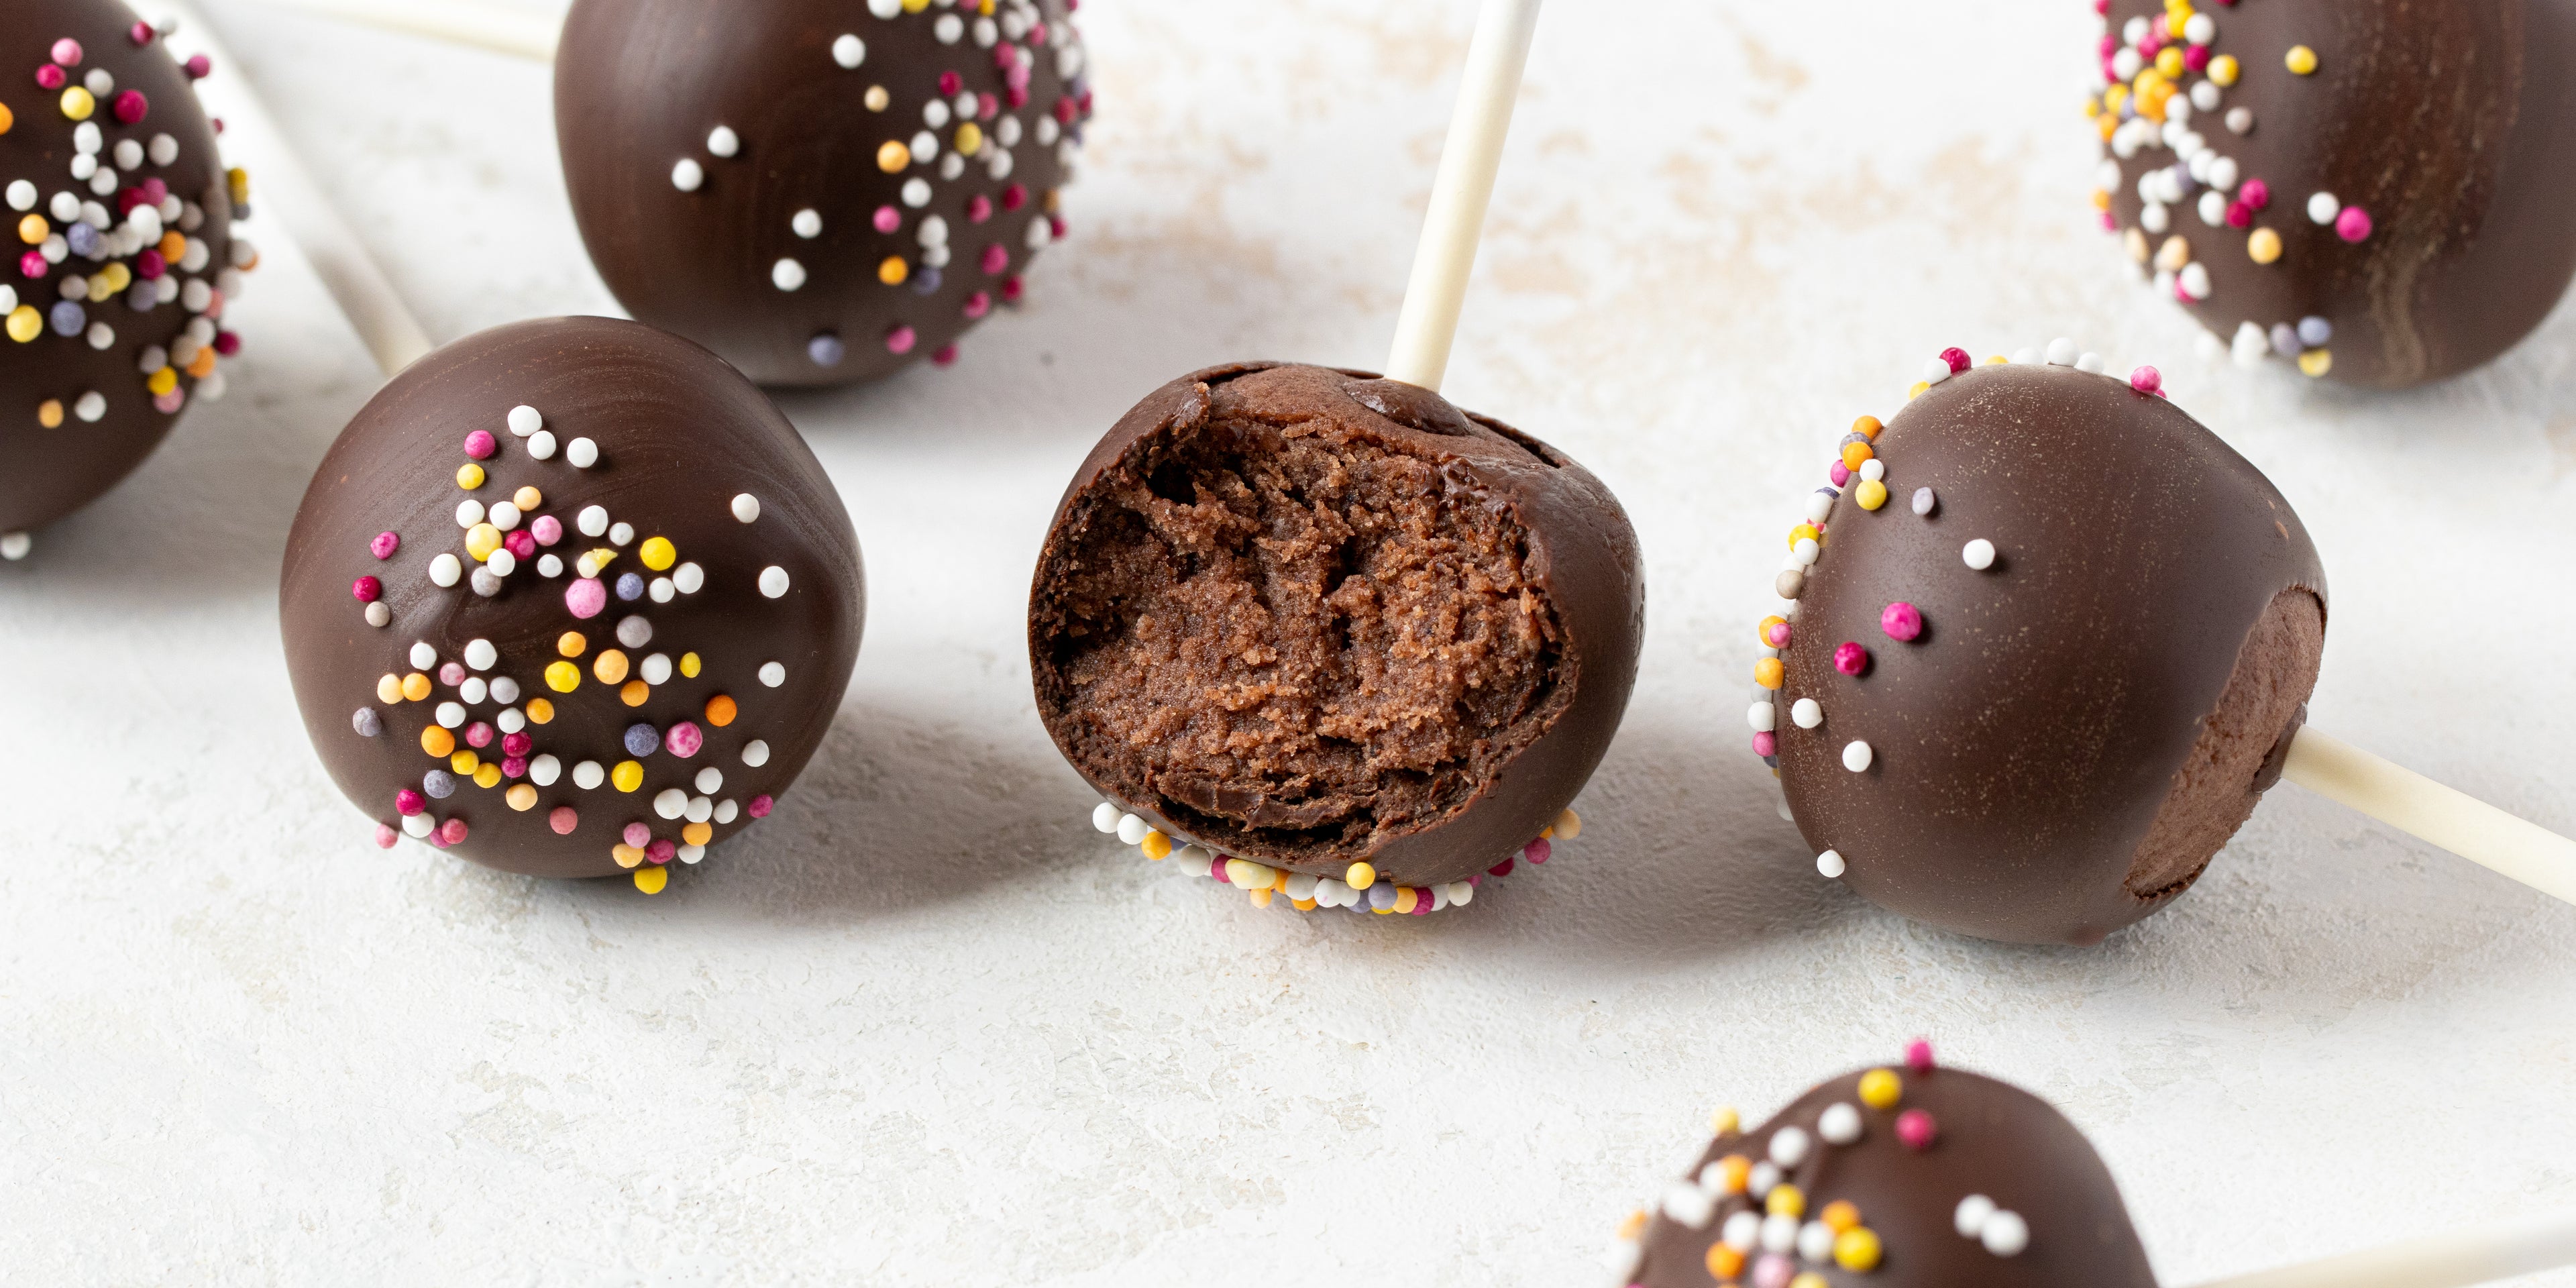 Close up of Chocolate Cake Pops with a bite taken out. Coated in chocolate and sprinkles